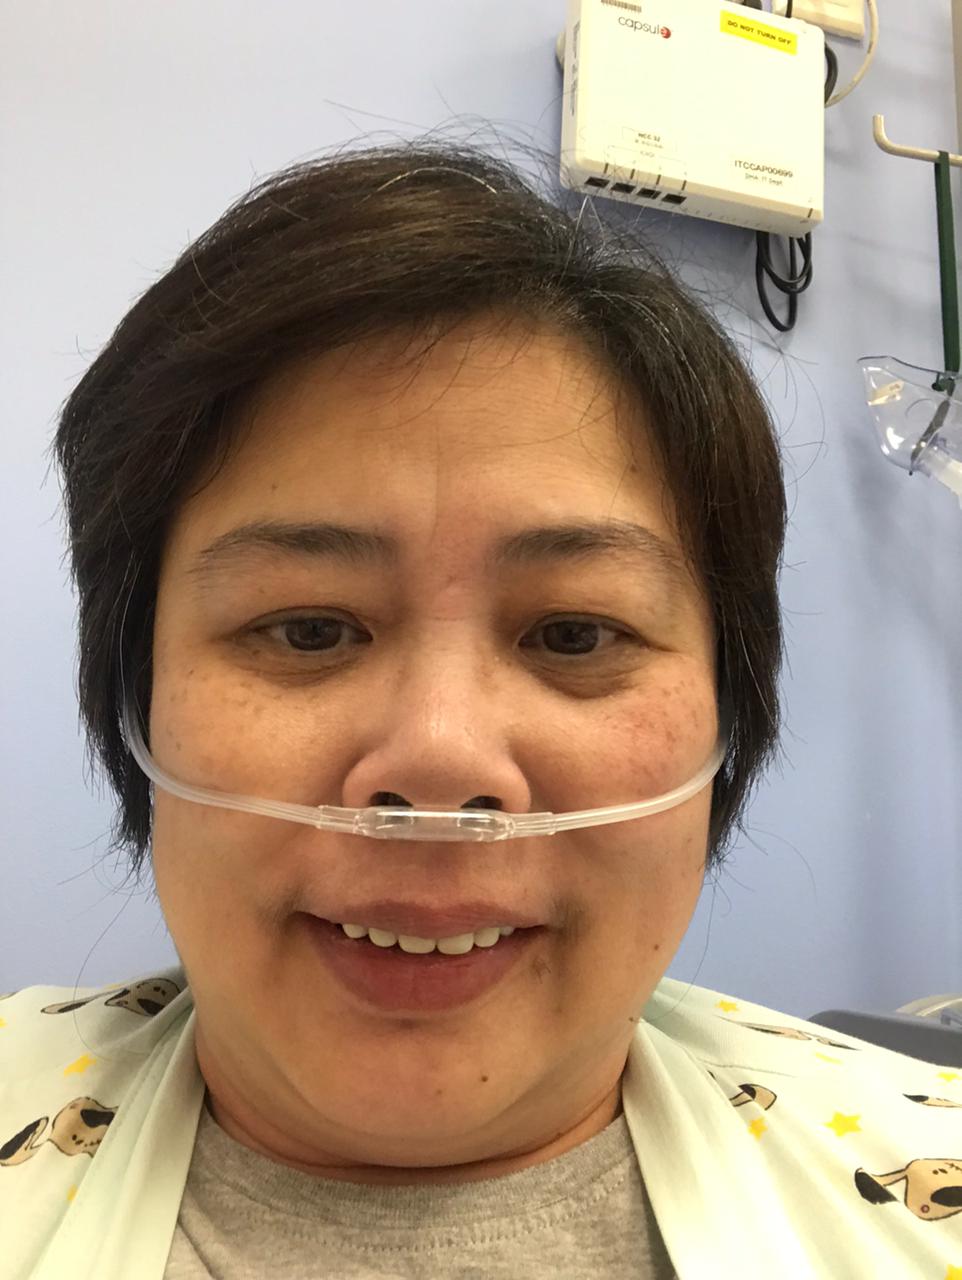 Sixth day on oxygen. Before this nasal cannula I was wearing and an oxygen mask. My breathing has improved during this time.